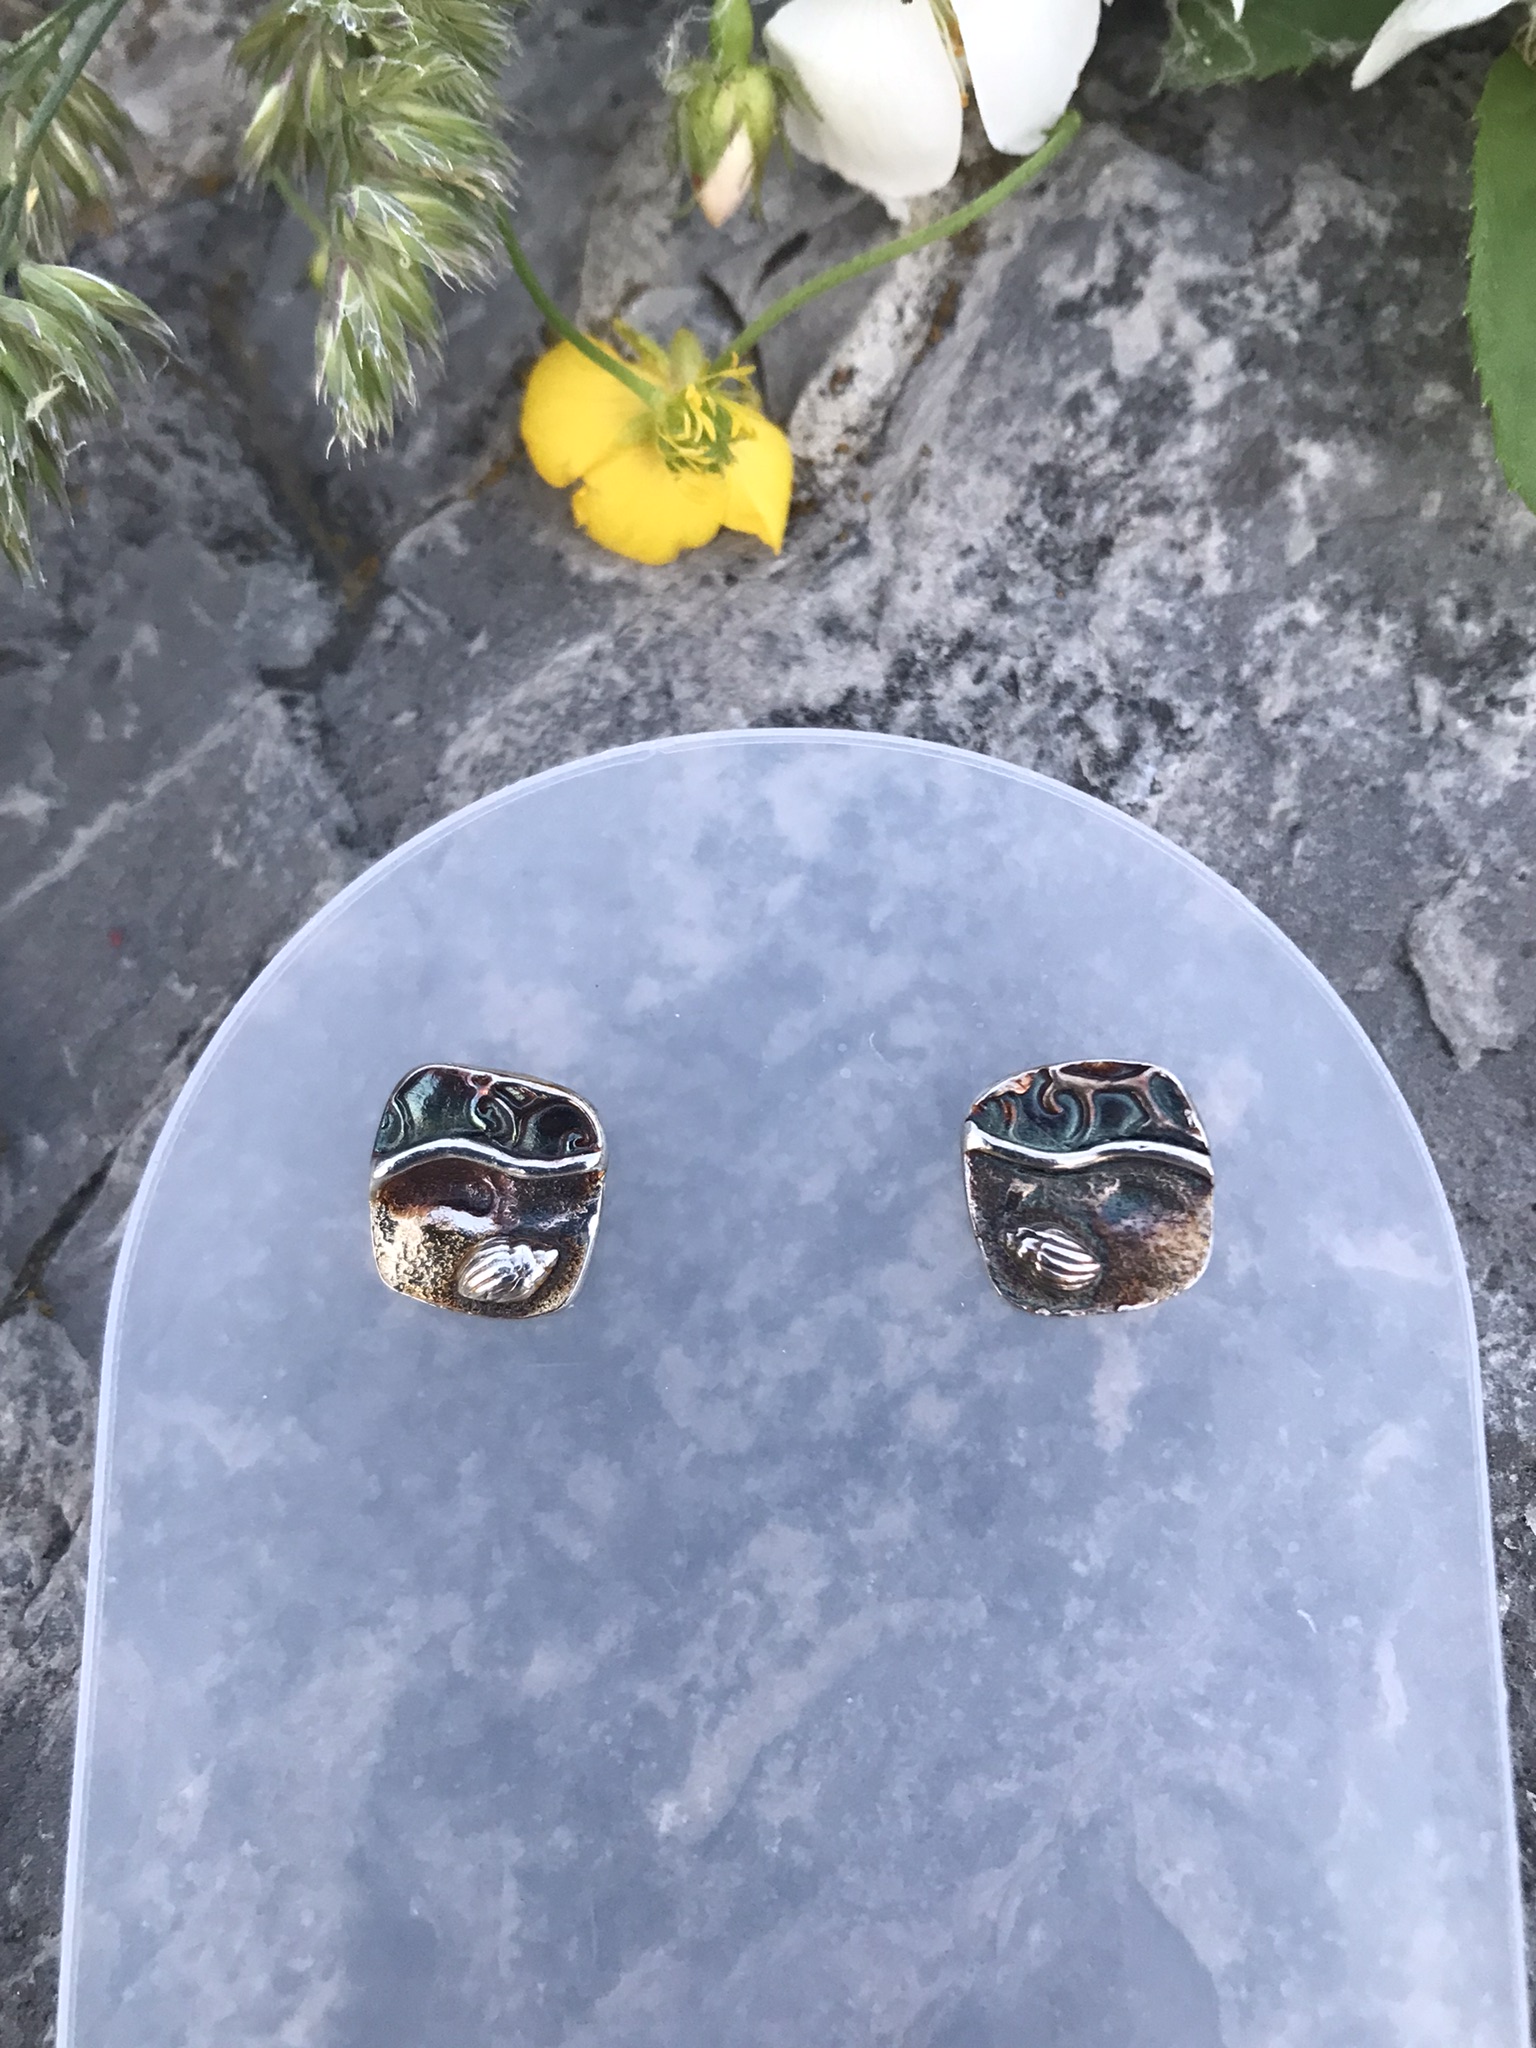 Never Alone Small Cushion Post Earrings- rounded square shaped earrings created in fine silver metal clay and showing a beach scene with water, shells and footprints in the sand with titanium posts